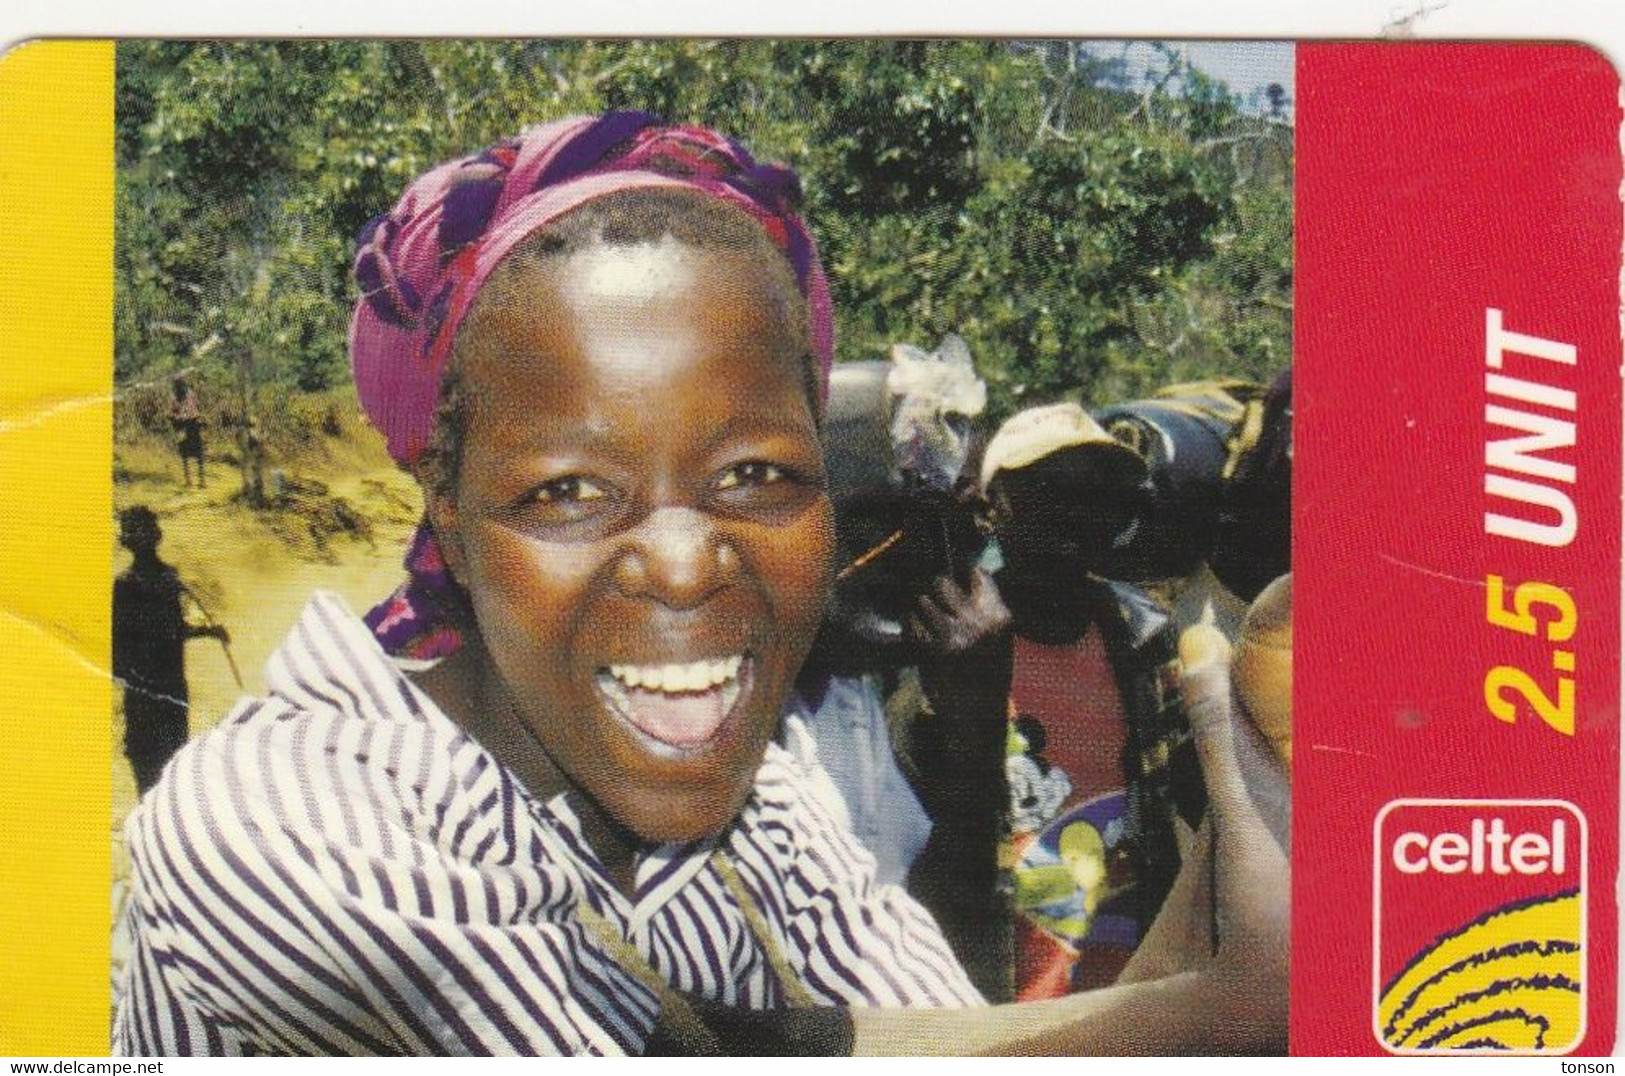 Zambia, ZM-CEL-REF-0011?, Celtel 2.5 Unit,  Smiling Young Woman, 2 Scans.  Code On The Back: "ZA 2.5".  Please Read - Sambia